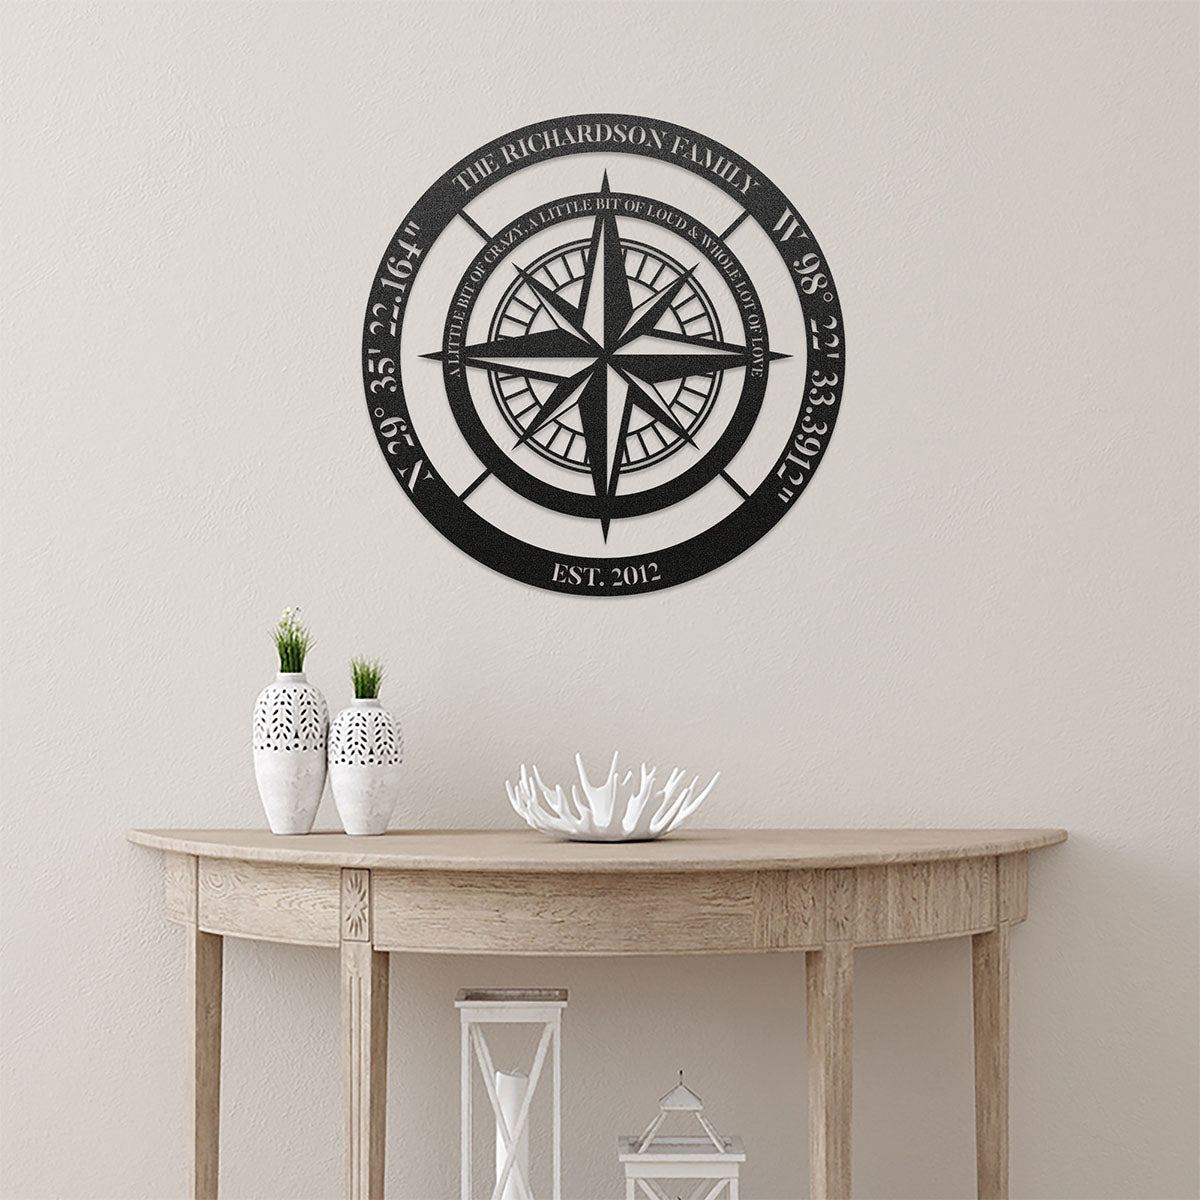 Personalized Compass Metal Sign - A Little Bit Of Crazy, A Little Bit Of Loud & Whole Lot Of Love